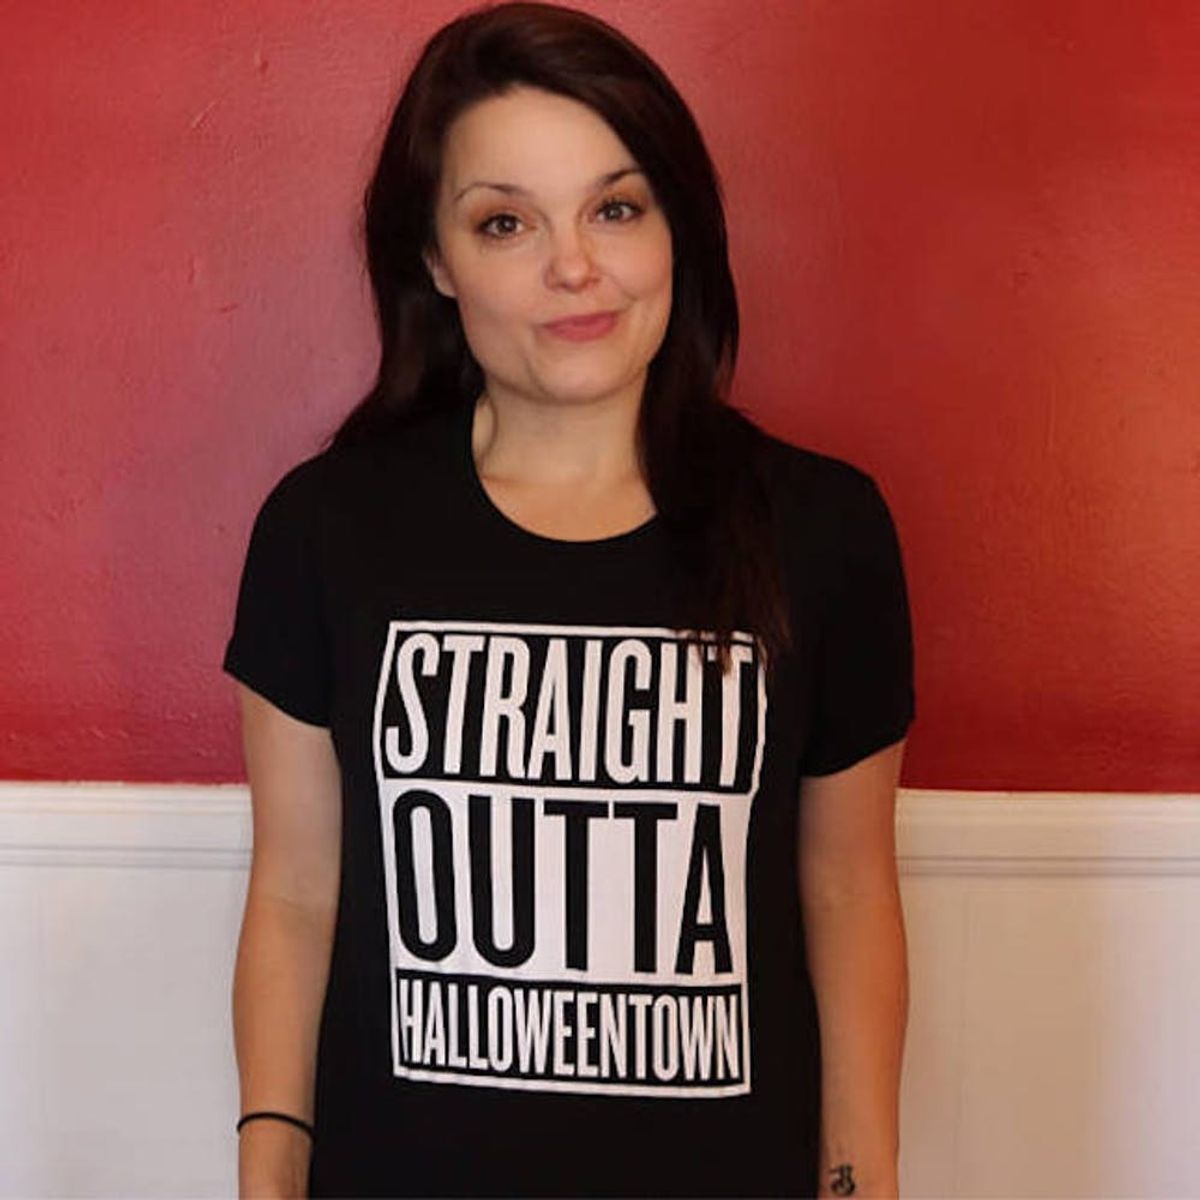 Marnie from “Halloweentown” Is Selling Magical Movie Merch